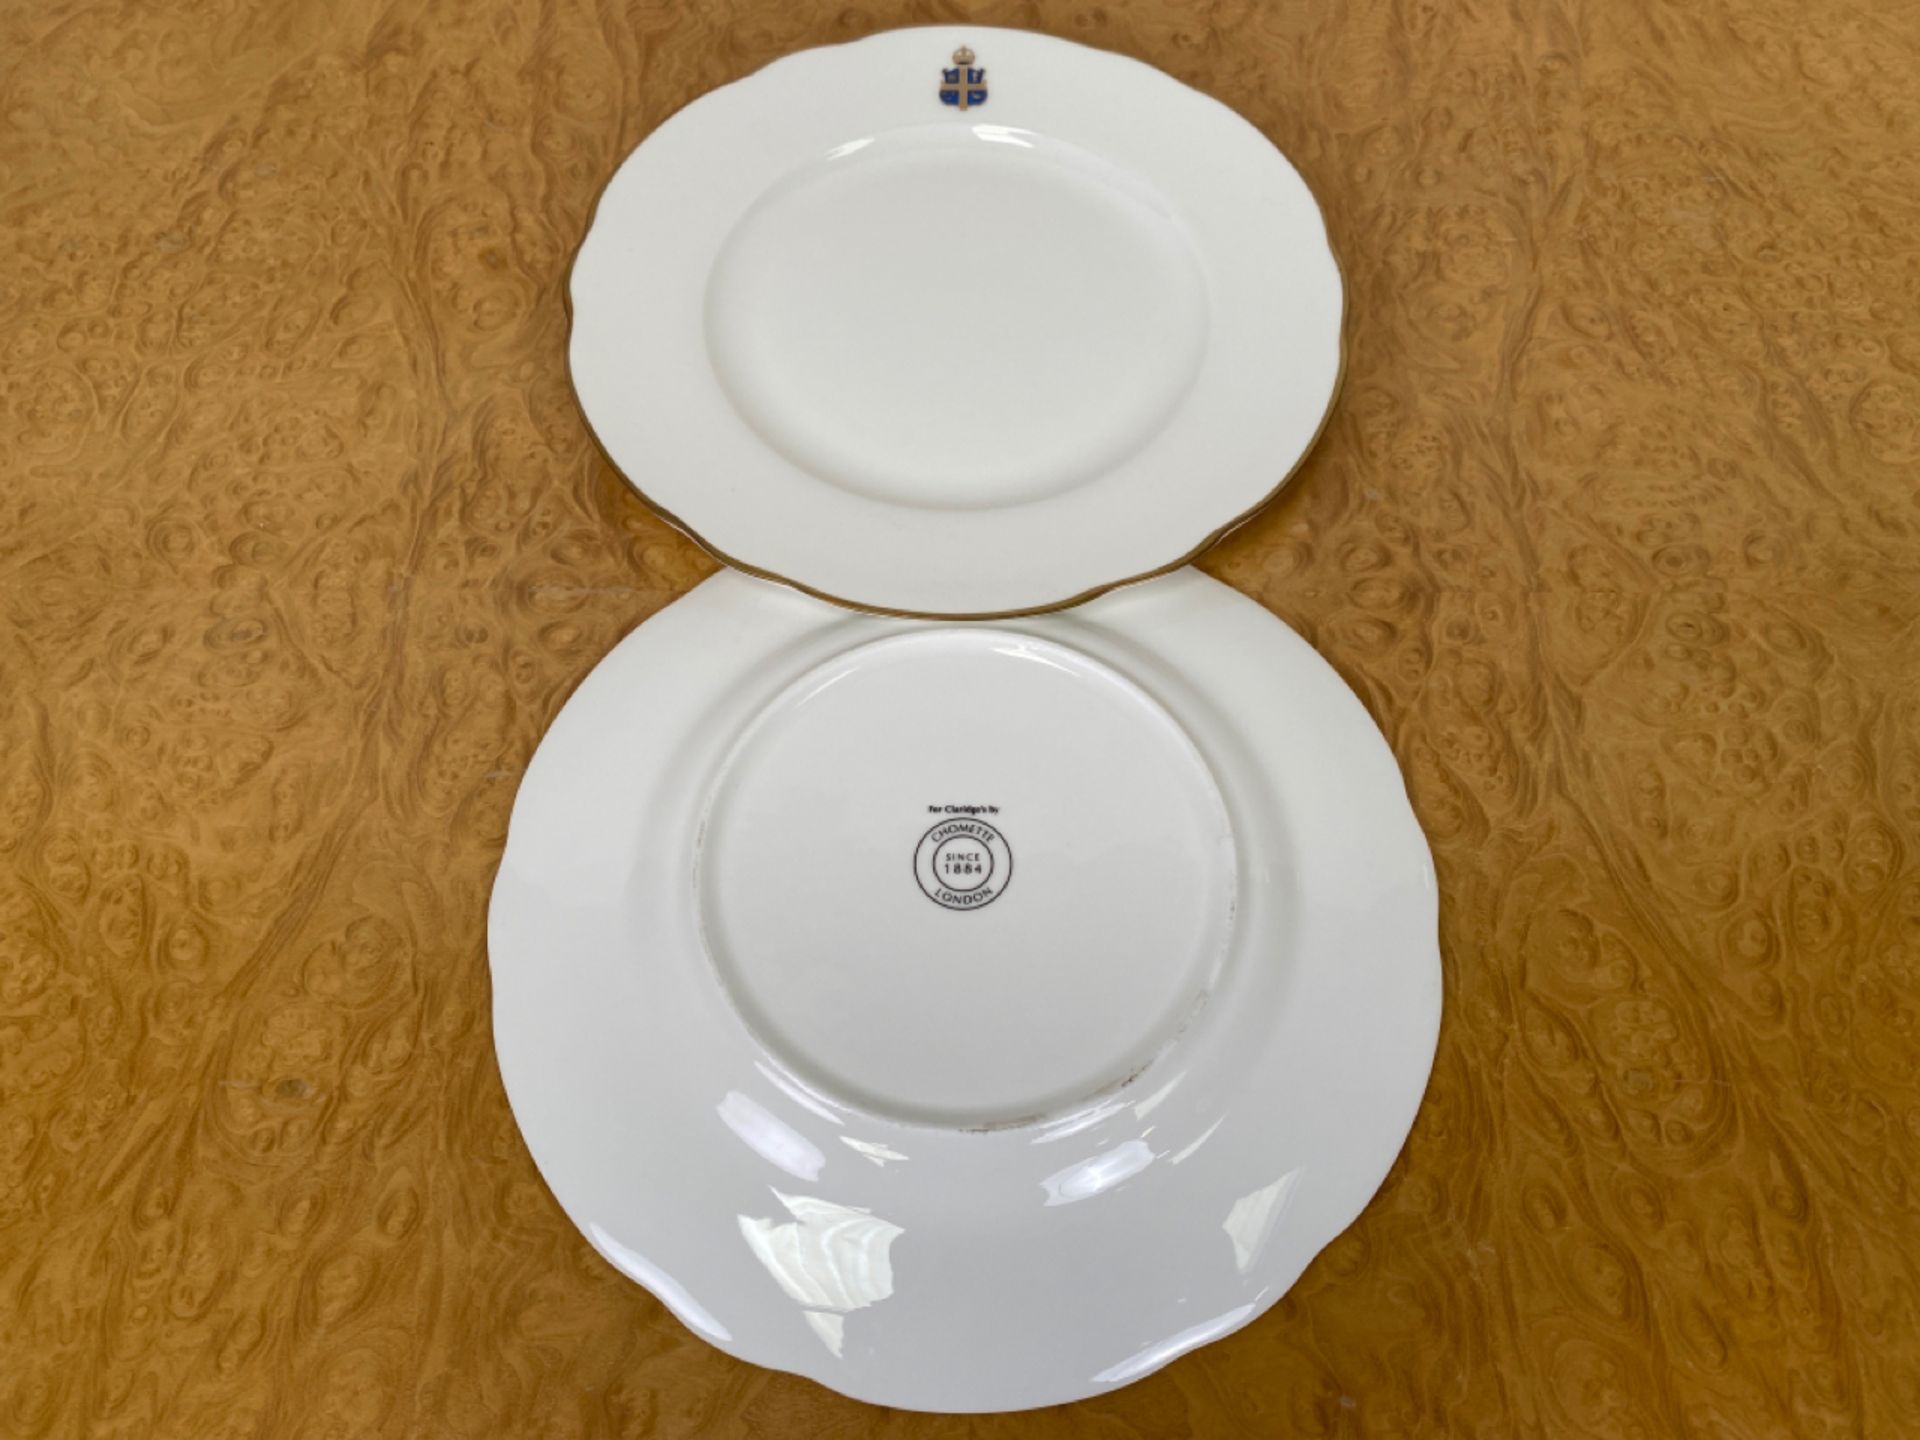 Set of Crested Crockery for Claridge's by Chommette 1884 - Image 26 of 38